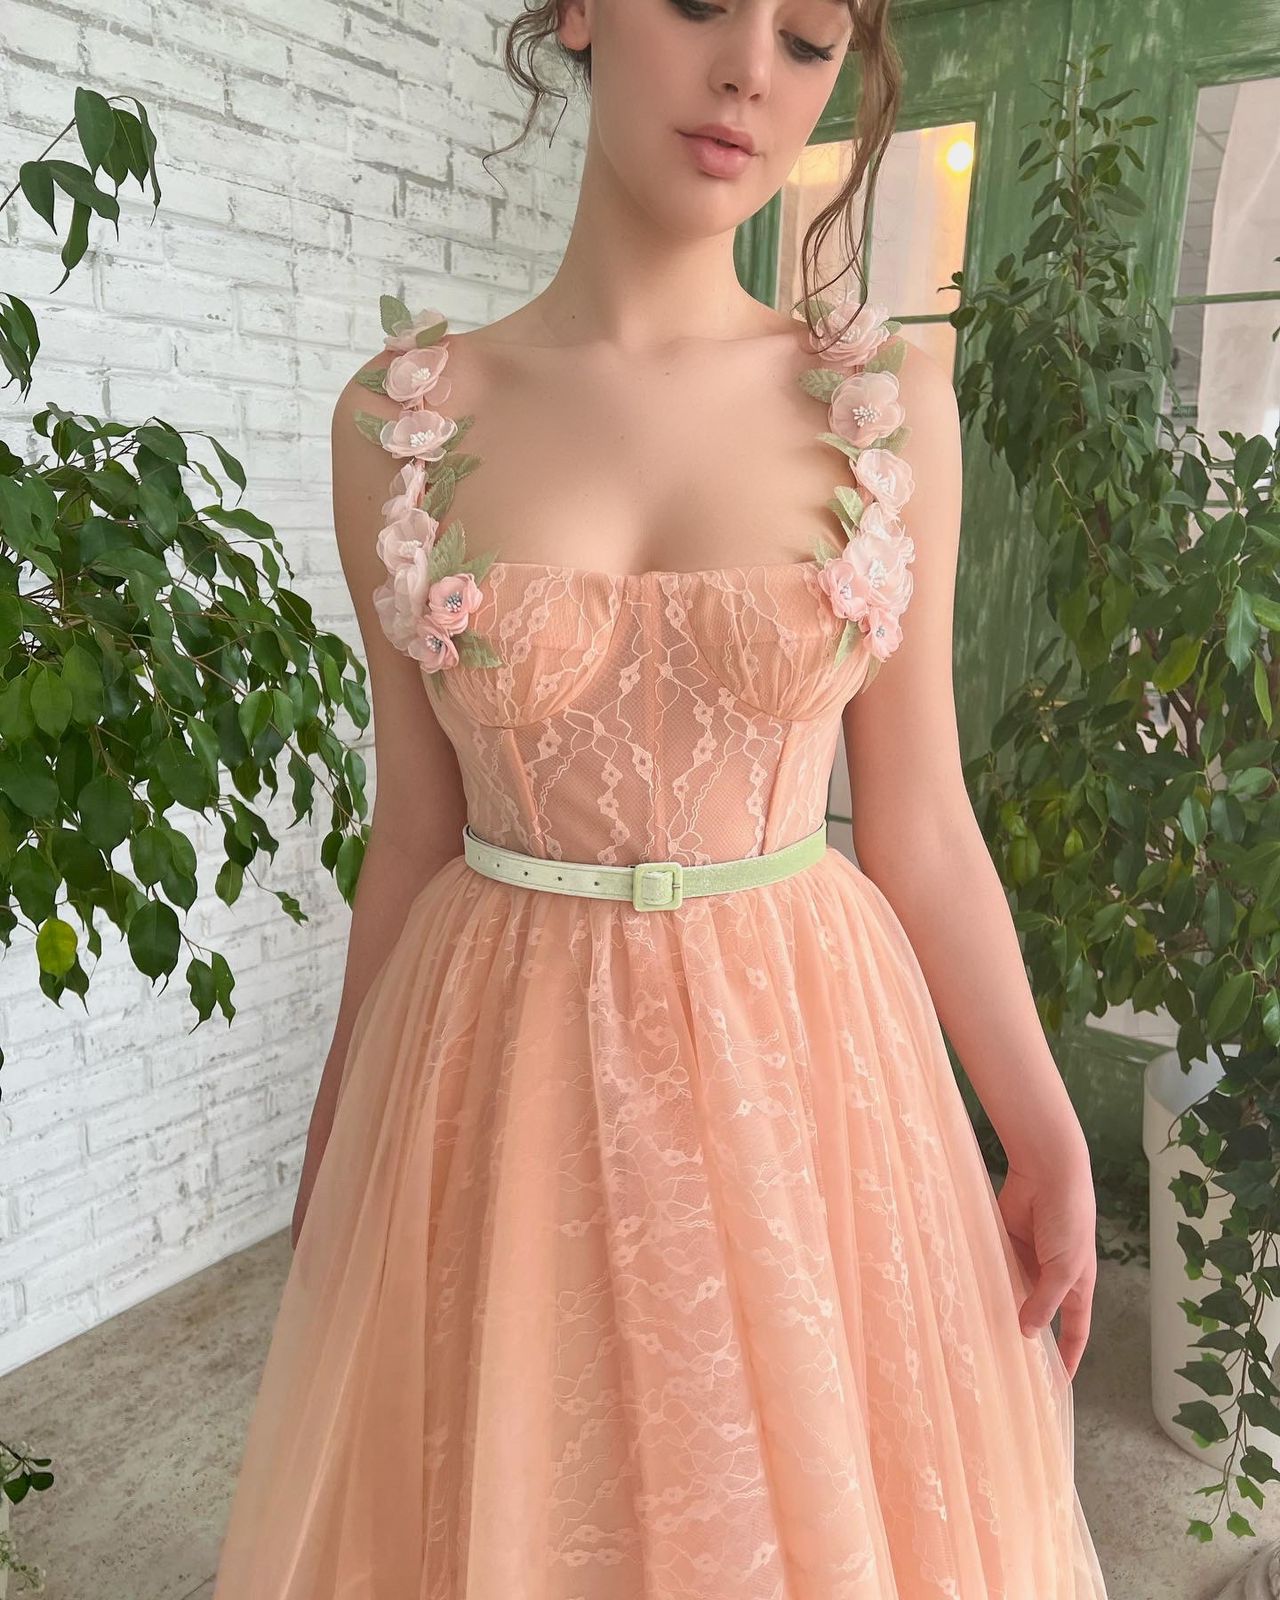 Peach midi dress with spaghetti straps, embroidery, flowers and belt